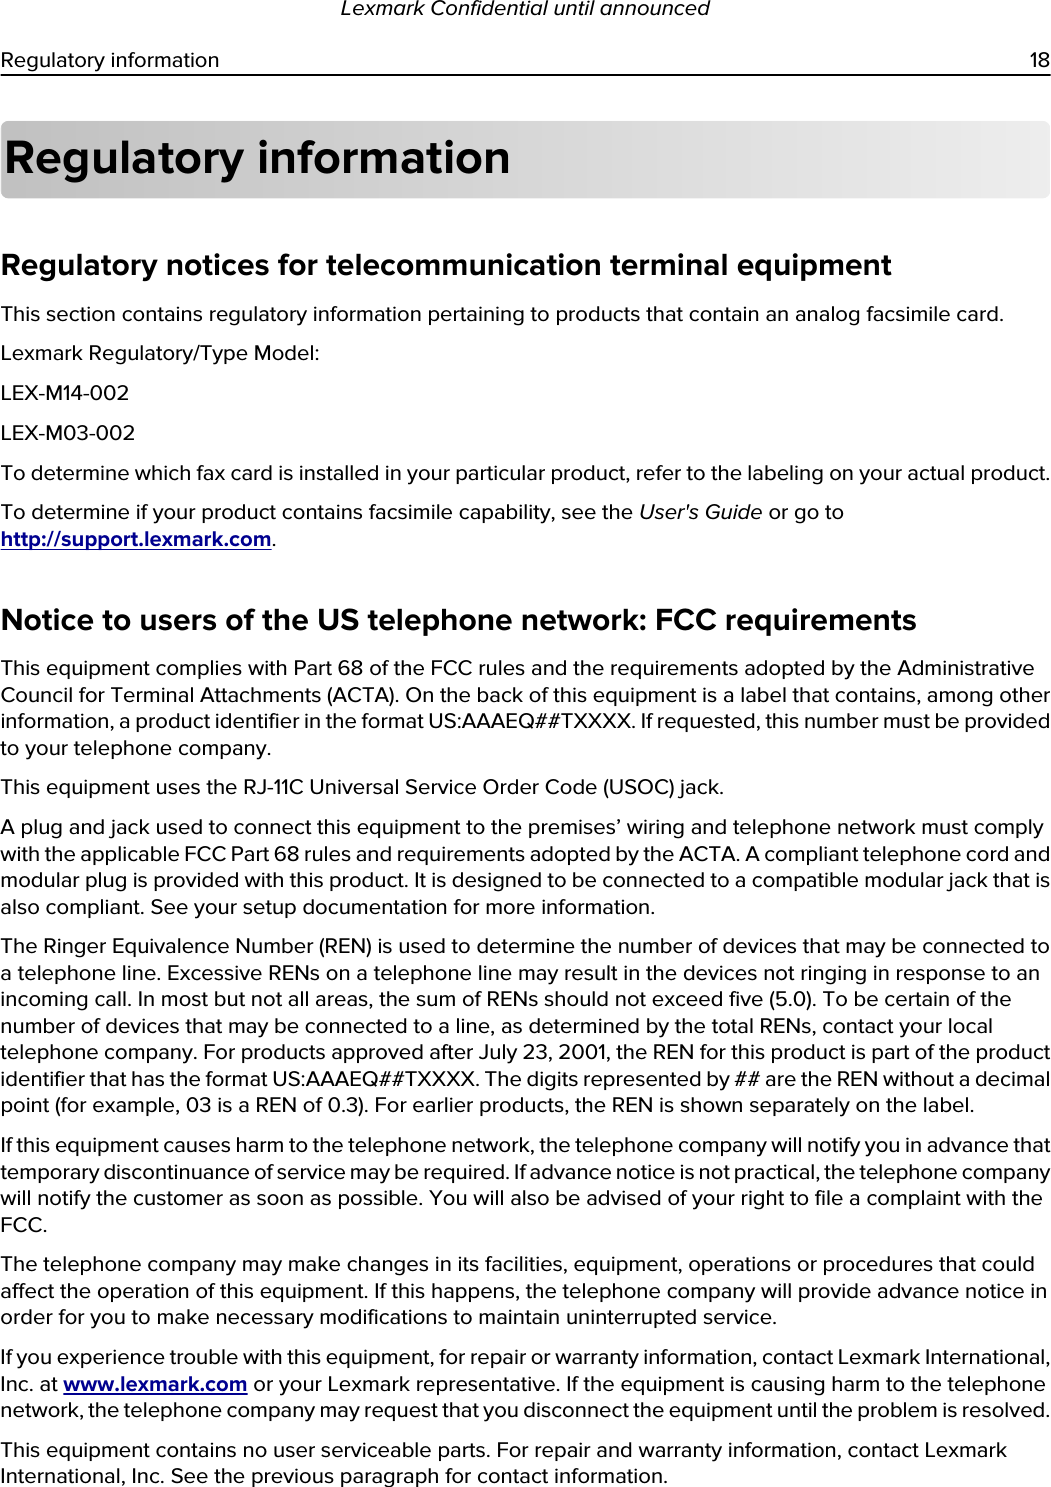 Regulatory informationRegulatory notices for telecommunication terminal equipmentThis section contains regulatory information pertaining to products that contain an analog facsimile card.Lexmark Regulatory/Type Model:LEX-M14-002LEX-M03-002To determine which fax card is installed in your particular product, refer to the labeling on your actual product.To determine if your product contains facsimile capability, see the User&apos;s Guide or go to http://support.lexmark.com.Notice to users of the US telephone network: FCC requirementsThis equipment complies with Part 68 of the FCC rules and the requirements adopted by the Administrative Council for Terminal Attachments (ACTA). On the back of this equipment is a label that contains, among other information, a product identifier in the format US:AAAEQ##TXXXX. If requested, this number must be provided to your telephone company.This equipment uses the RJ-11C Universal Service Order Code (USOC) jack.A plug and jack used to connect this equipment to the premises’ wiring and telephone network must comply with the applicable FCC Part 68 rules and requirements adopted by the ACTA. A compliant telephone cord and modular plug is provided with this product. It is designed to be connected to a compatible modular jack that is also compliant. See your setup documentation for more information.The Ringer Equivalence Number (REN) is used to determine the number of devices that may be connected to a telephone line. Excessive RENs on a telephone line may result in the devices not ringing in response to an incoming call. In most but not all areas, the sum of RENs should not exceed five (5.0). To be certain of the number of devices that may be connected to a line, as determined by the total RENs, contact your local telephone company. For products approved after July 23, 2001, the REN for this product is part of the product identifier that has the format US:AAAEQ##TXXXX. The digits represented by ## are the REN without a decimal point (for example, 03 is a REN of 0.3). For earlier products, the REN is shown separately on the label.If this equipment causes harm to the telephone network, the telephone company will notify you in advance that temporary discontinuance of service may be required. If advance notice is not practical, the telephone company will notify the customer as soon as possible. You will also be advised of your right to file a complaint with the FCC.The telephone company may make changes in its facilities, equipment, operations or procedures that could affect the operation of this equipment. If this happens, the telephone company will provide advance notice in order for you to make necessary modifications to maintain uninterrupted service.If you experience trouble with this equipment, for repair or warranty information, contact Lexmark International, Inc. at www.lexmark.com or your Lexmark representative. If the equipment is causing harm to the telephone network, the telephone company may request that you disconnect the equipment until the problem is resolved.This equipment contains no user serviceable parts. For repair and warranty information, contact Lexmark International, Inc. See the previous paragraph for contact information.Lexmark Confidential until announcedRegulatory information 18